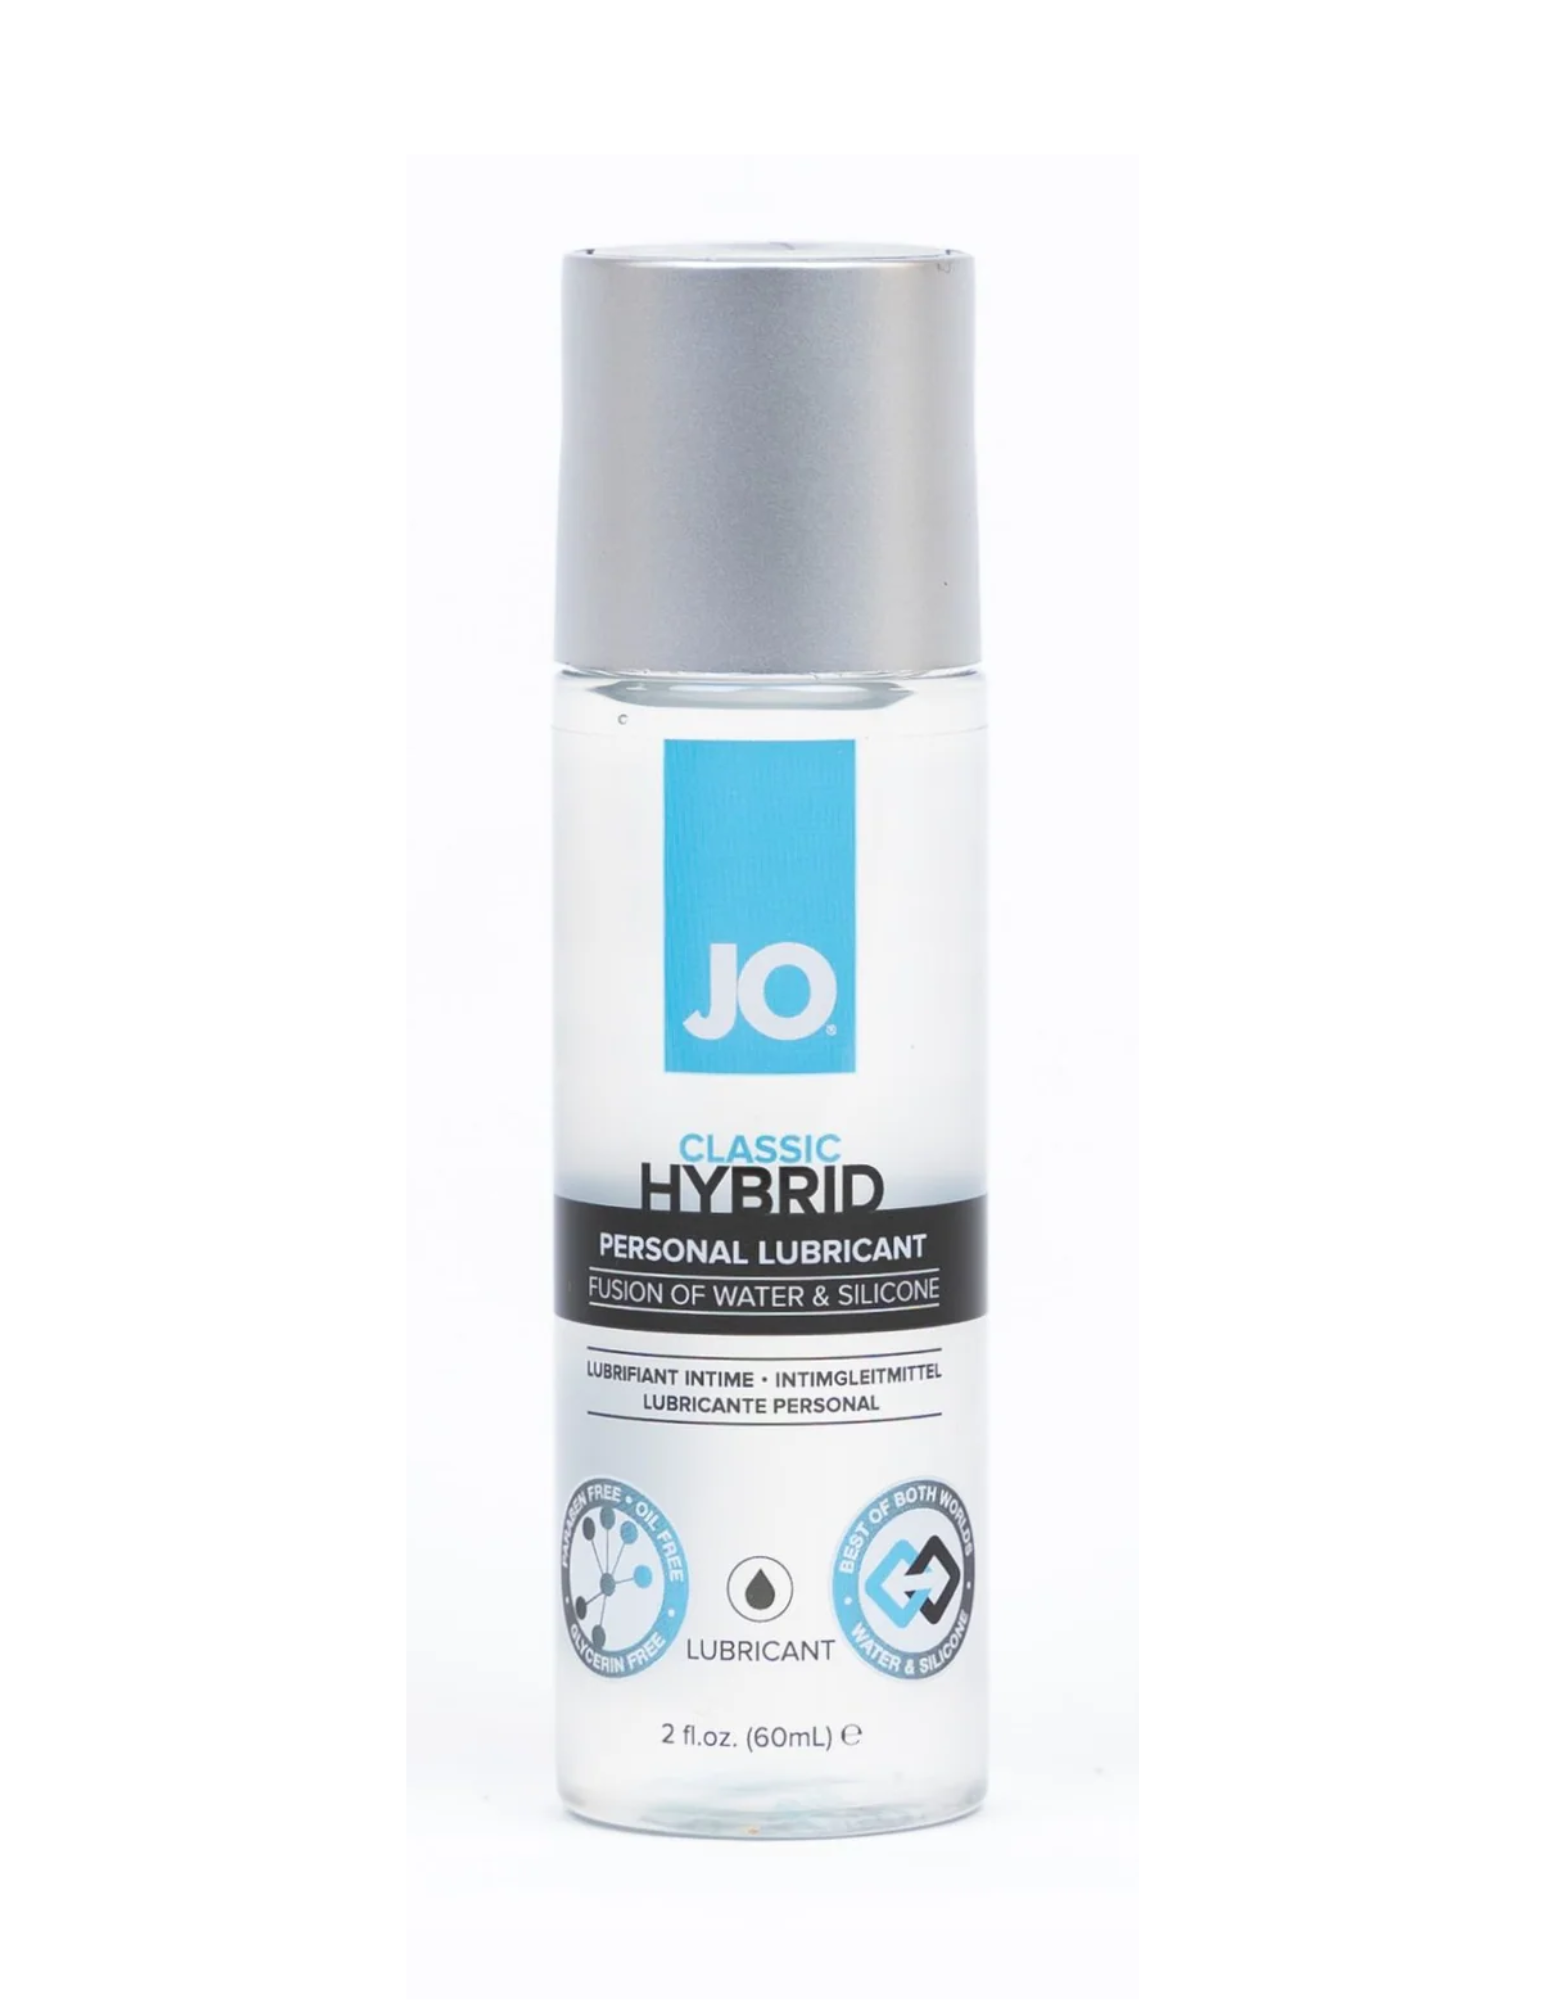 Front image of the System Jo Hybrid lubricant bottle, 2oz.